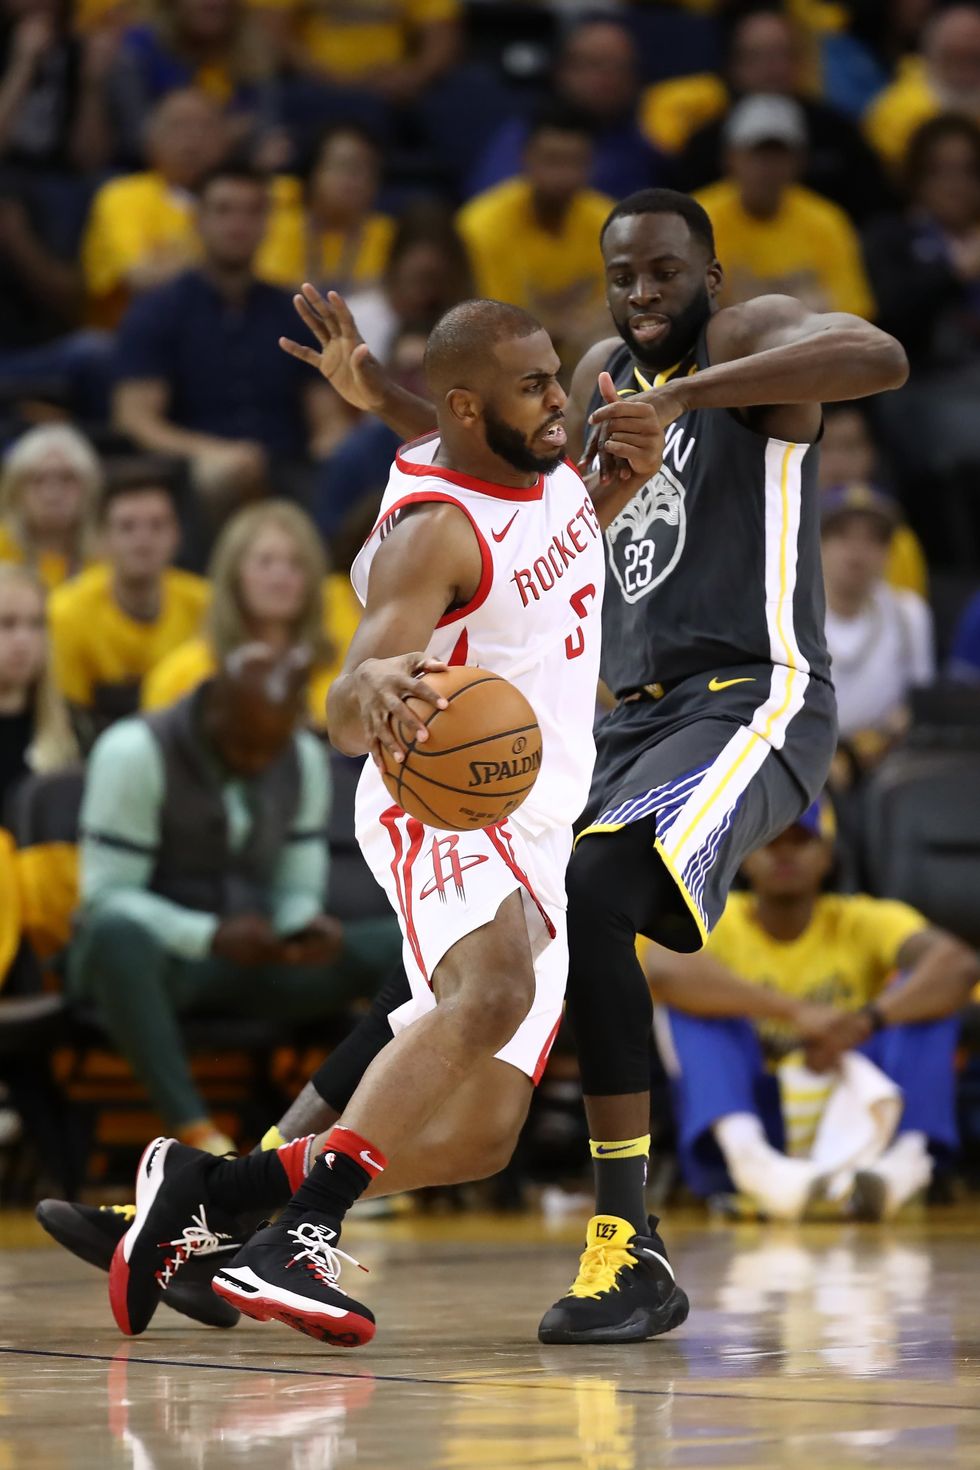 Fred Faour: 5 quick thoughts on the Rockets' Game 4 win over the Warriors